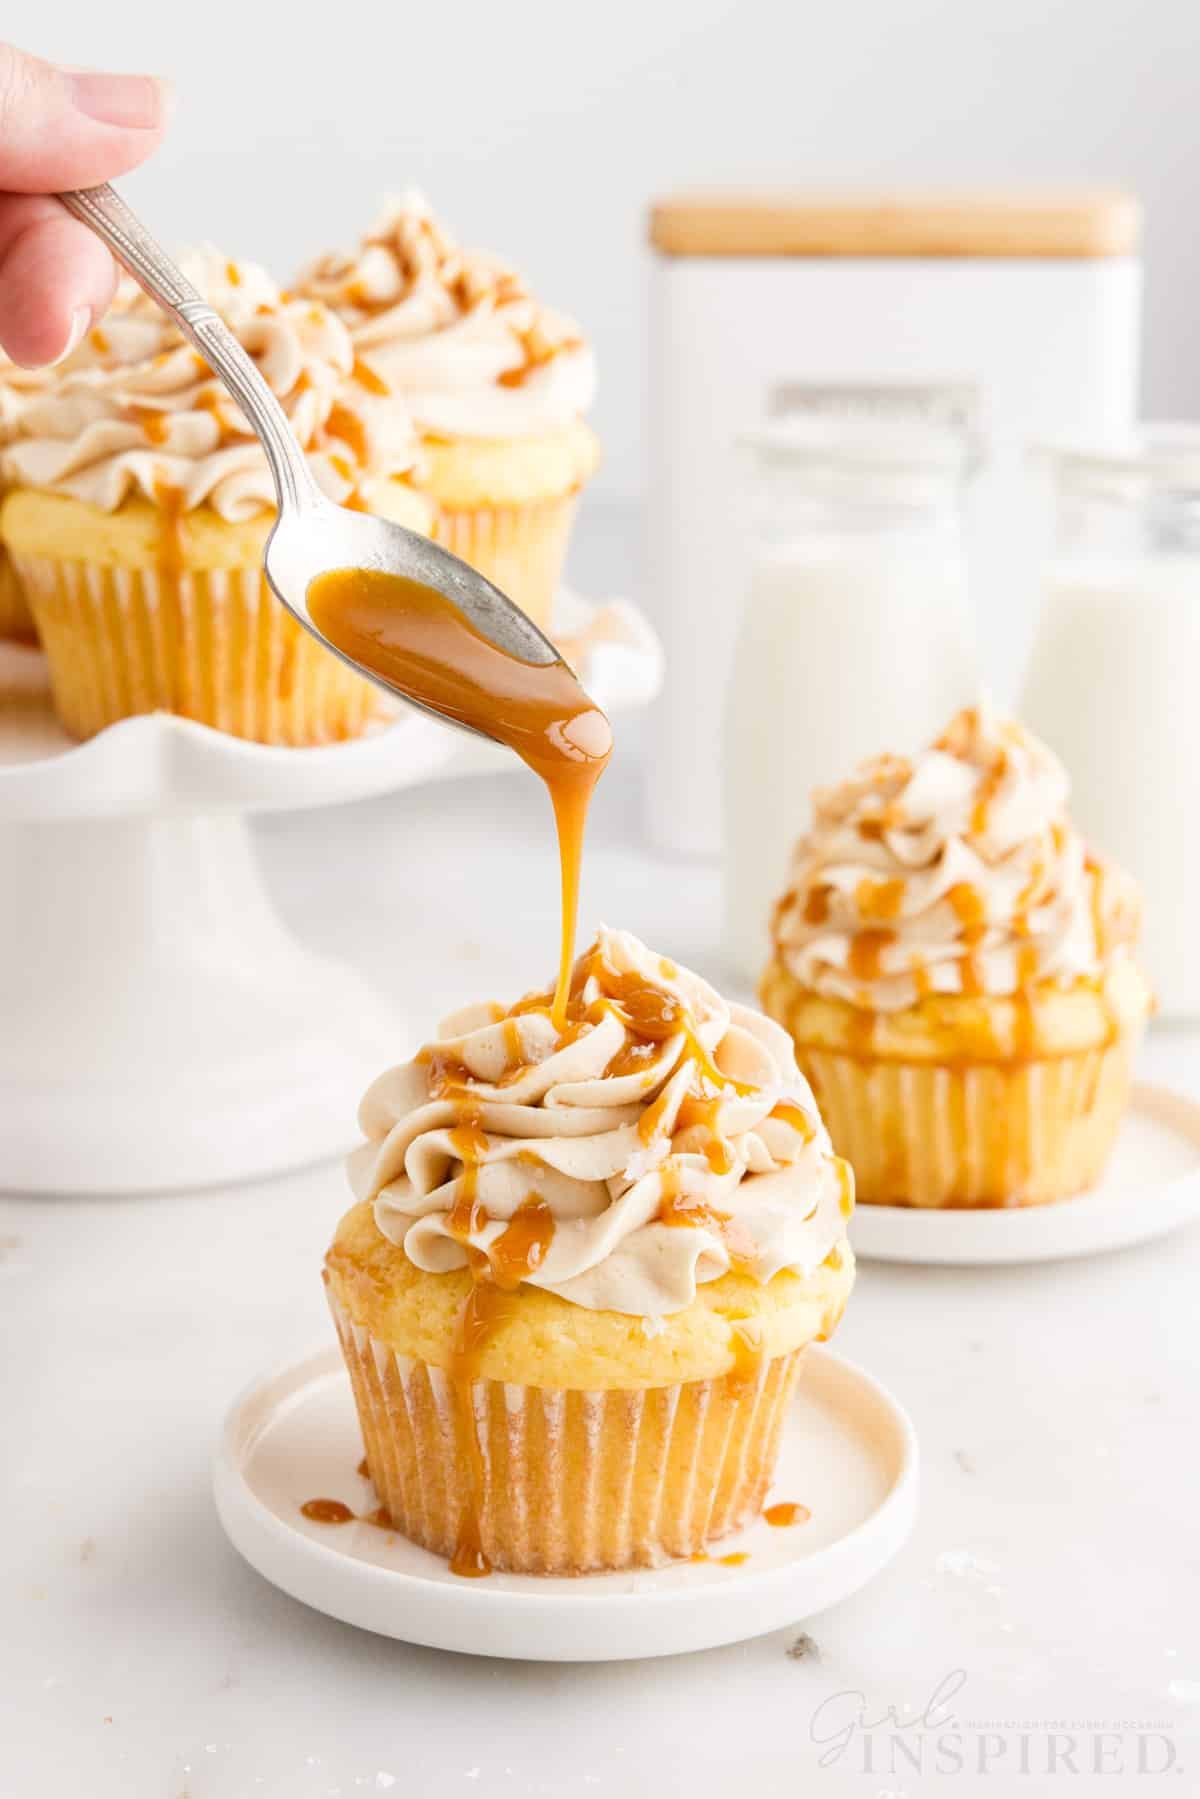 Caramel being drizzled from a spoon onto a Salted Caramel Cupcake.